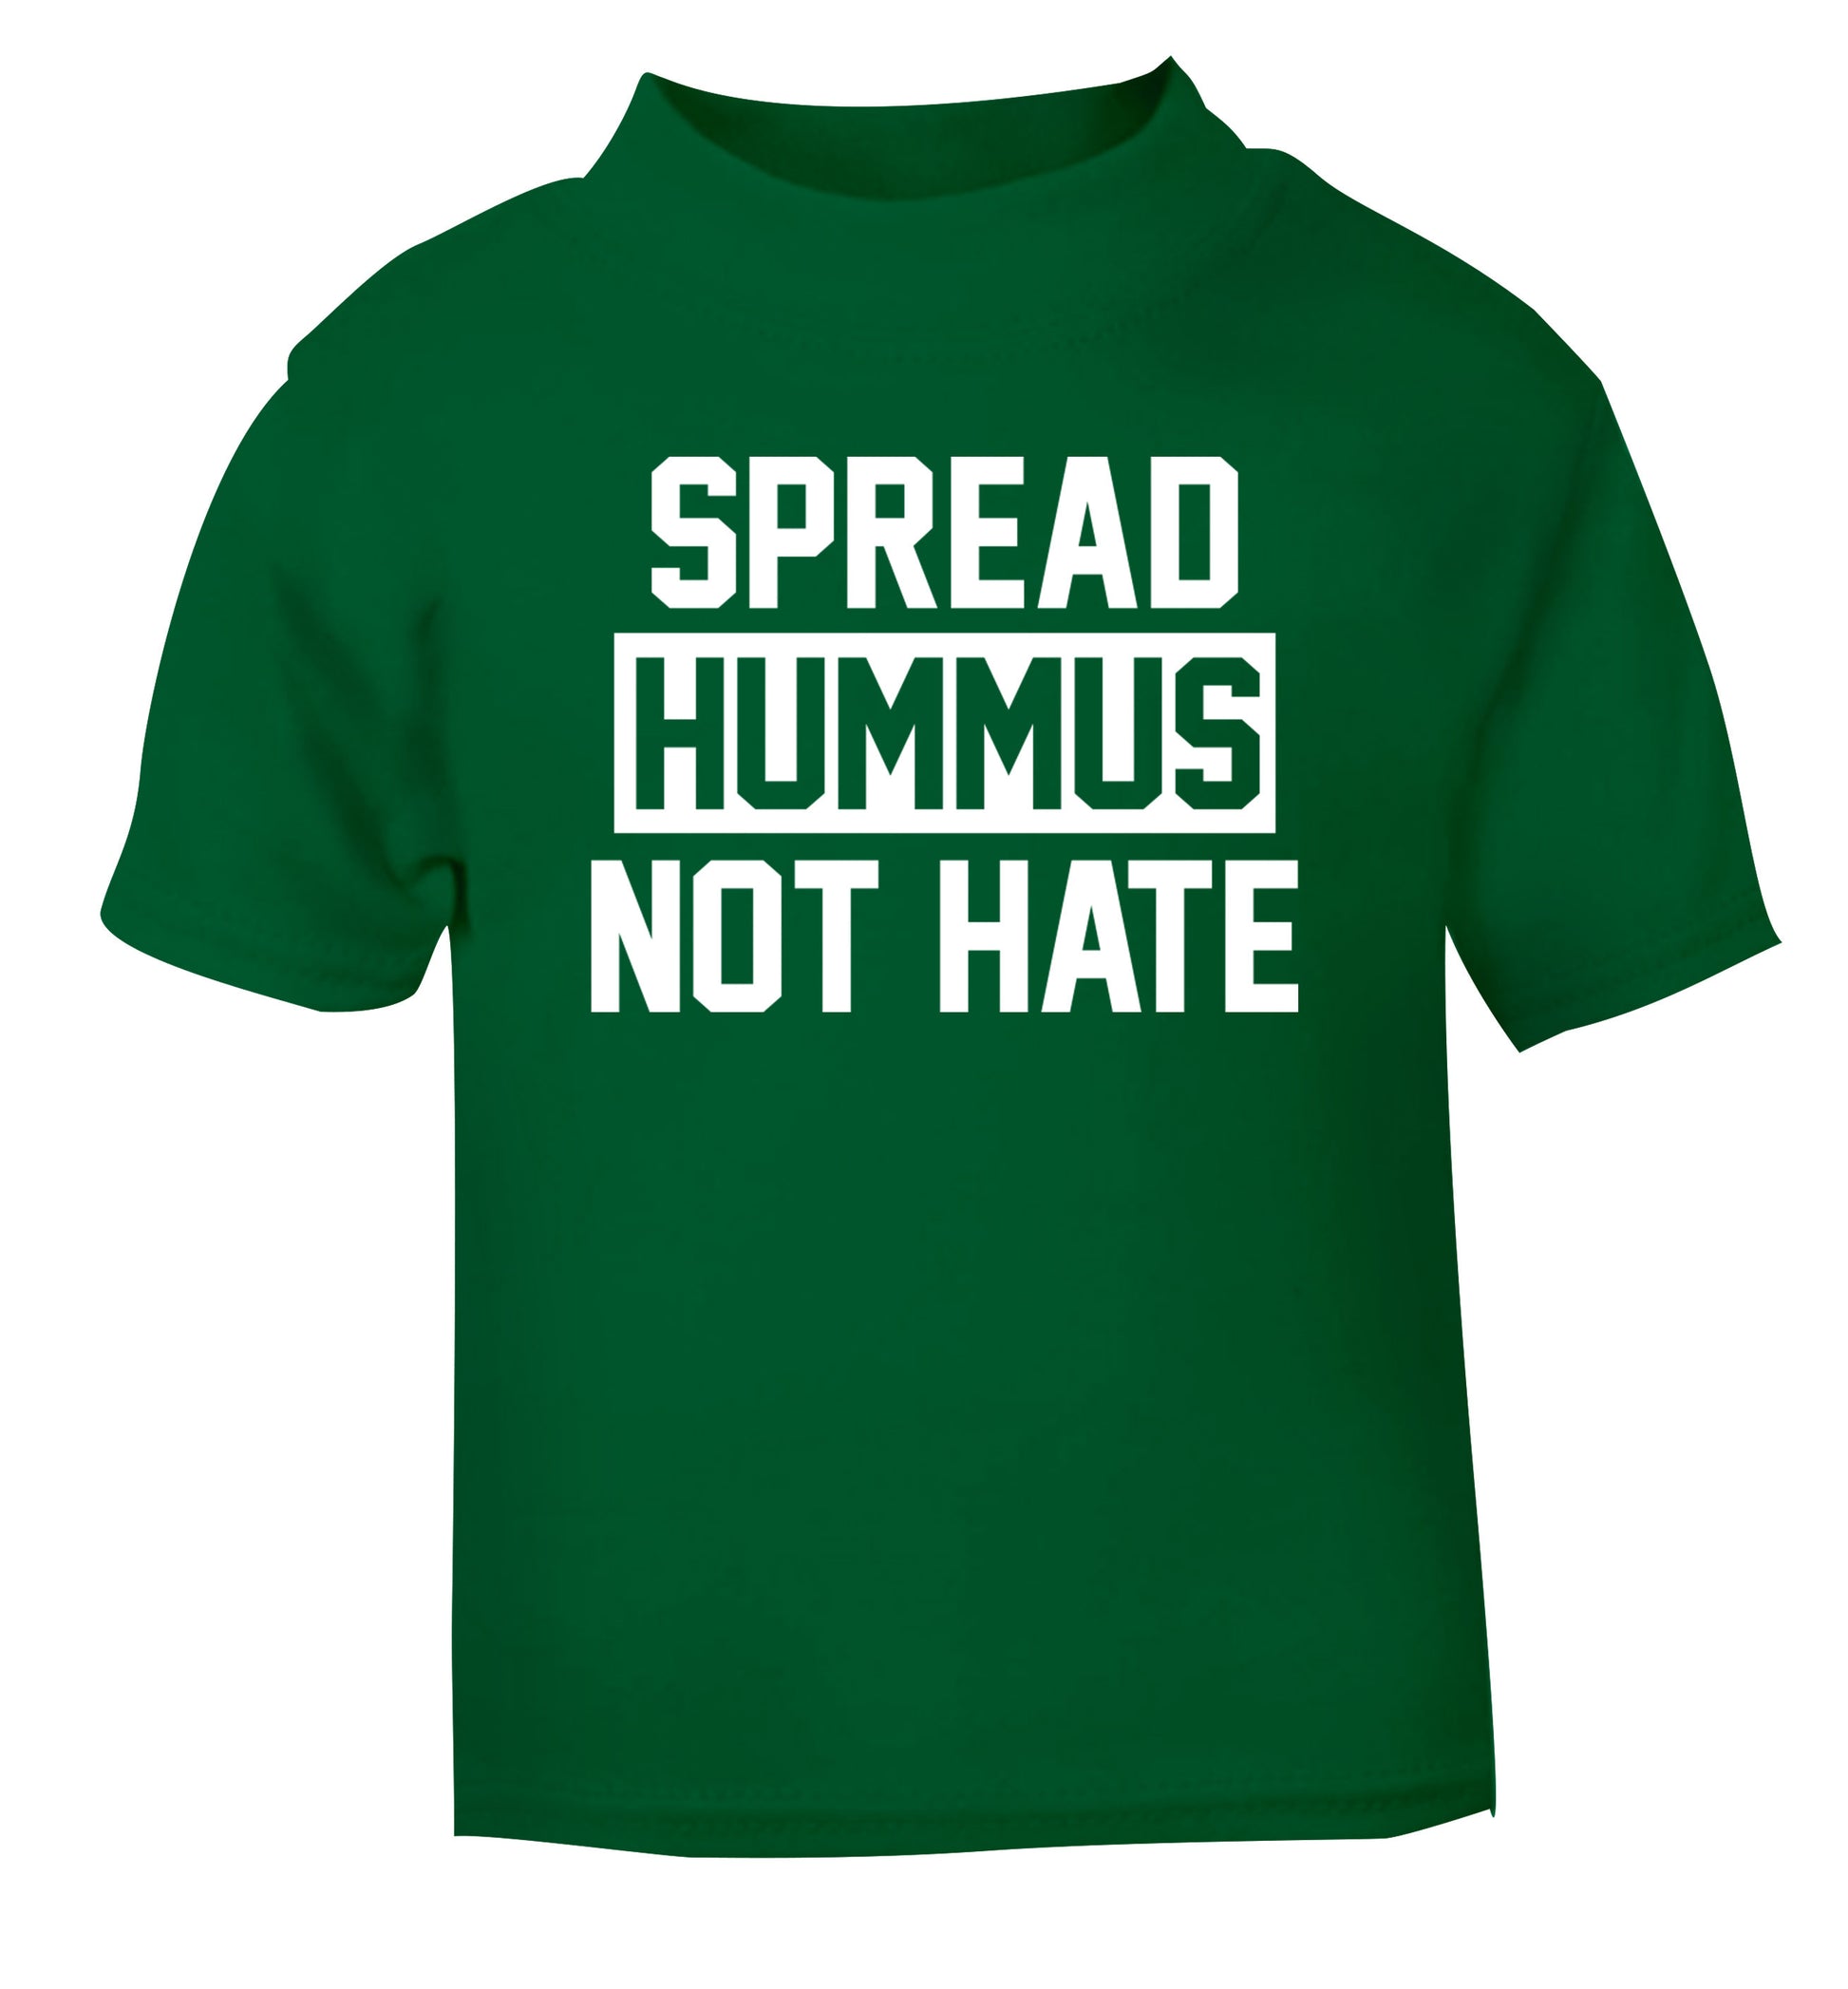 Spread hummus not hate green Baby Toddler Tshirt 2 Years